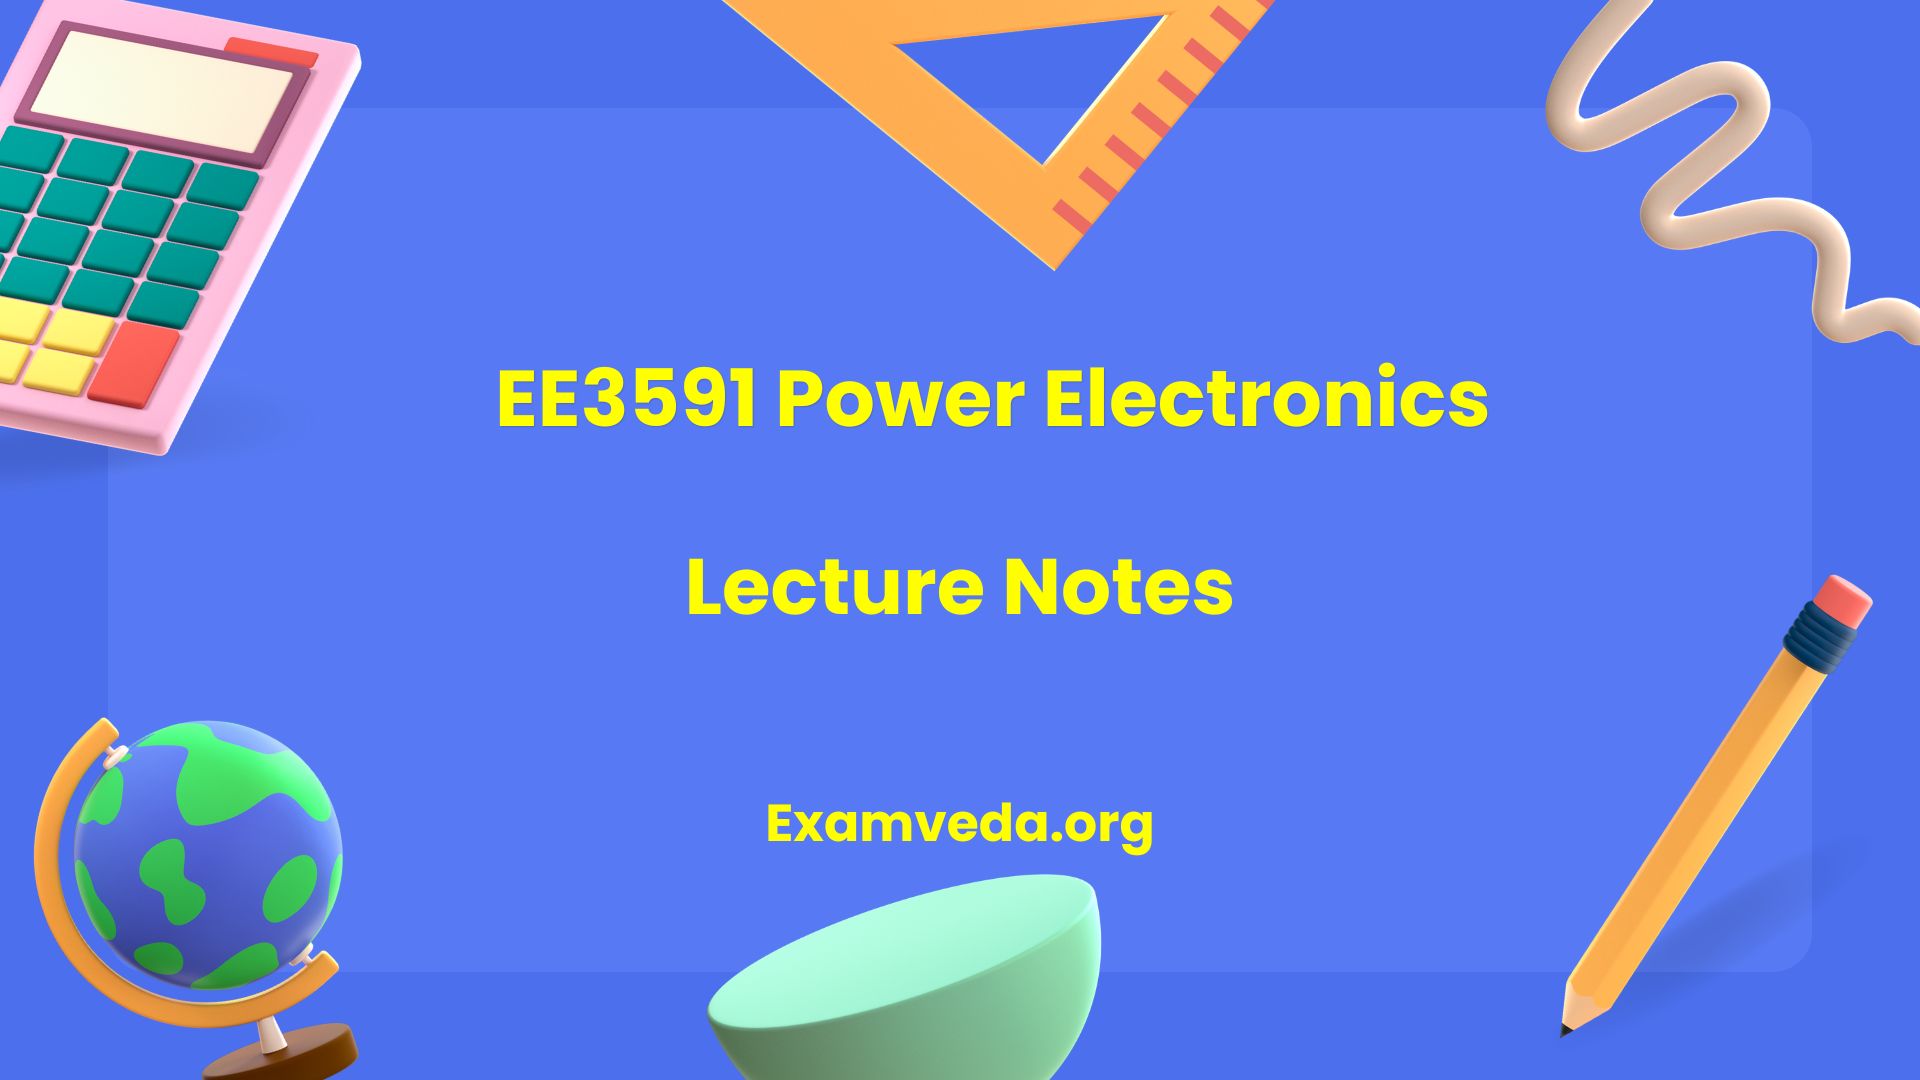 EE3591 Power Electronics Lecture Notes